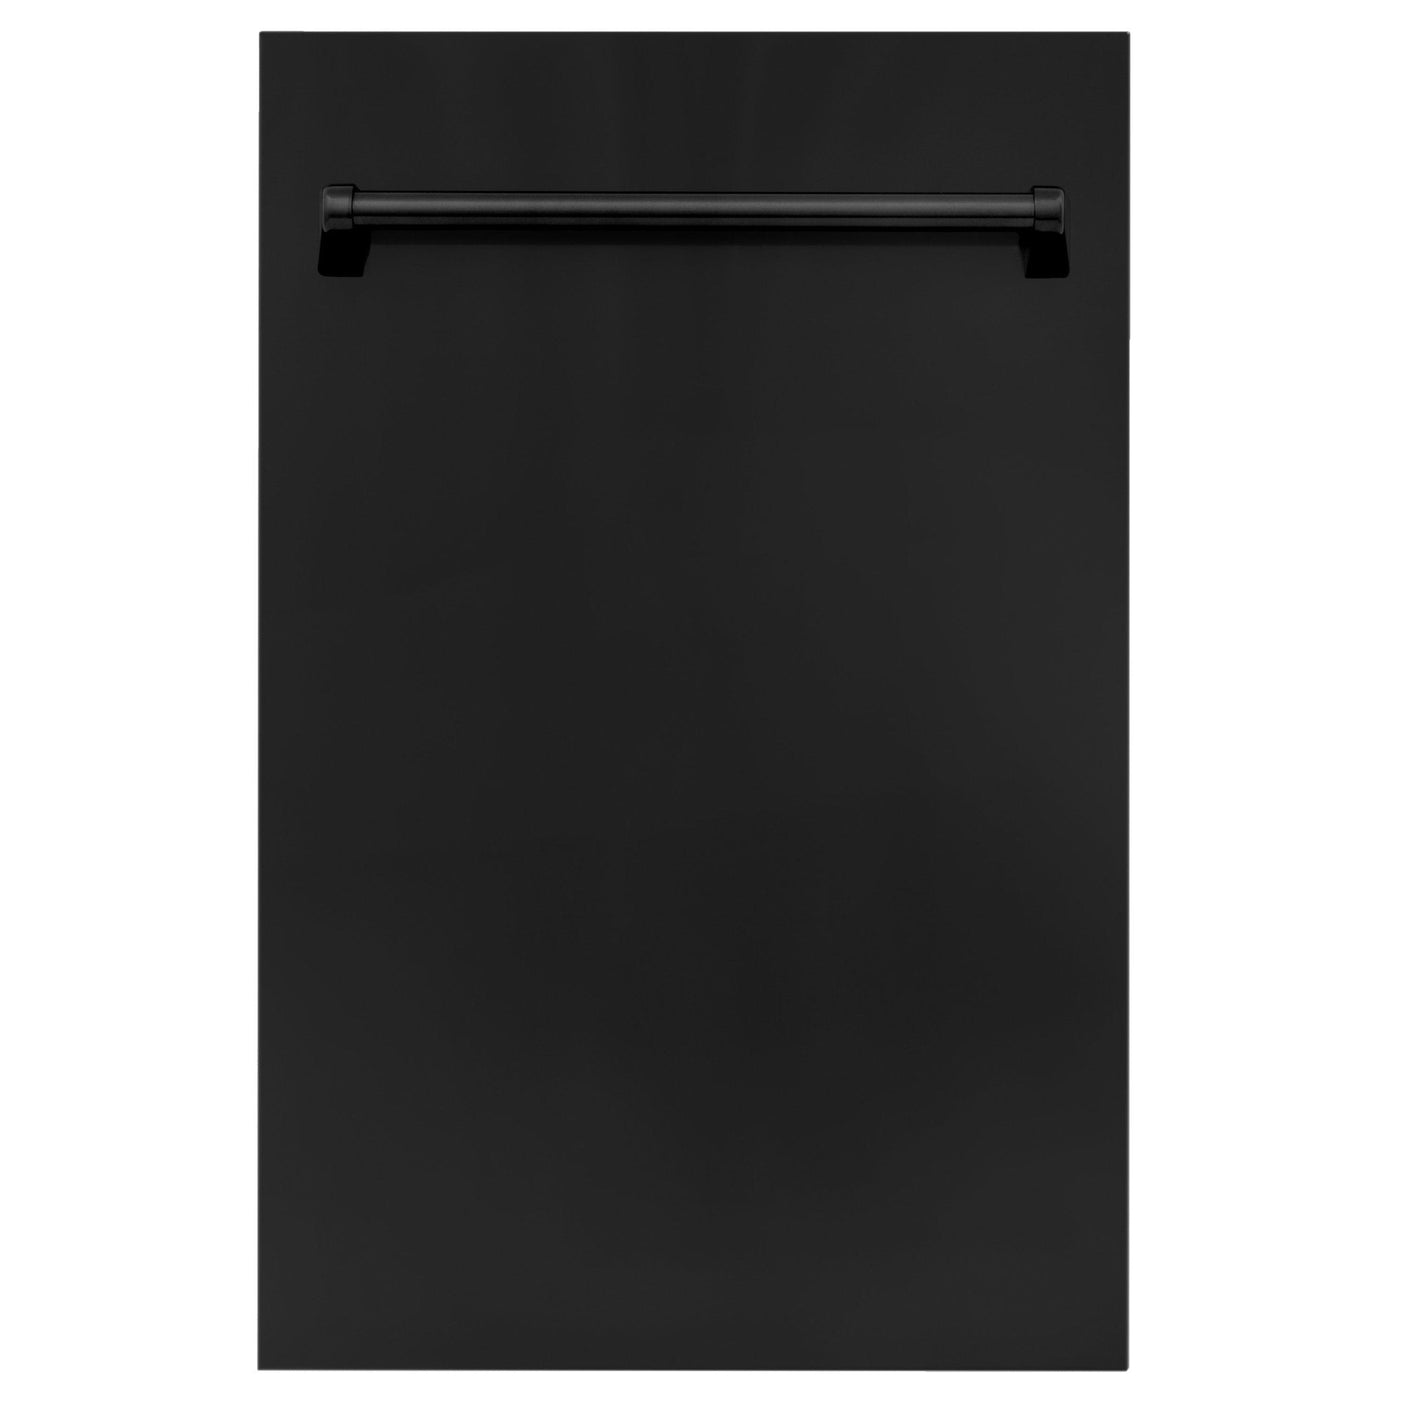 ZLINE 18 in. Dishwasher Panel with Traditional Handle (DP-18) [Color: Copper]